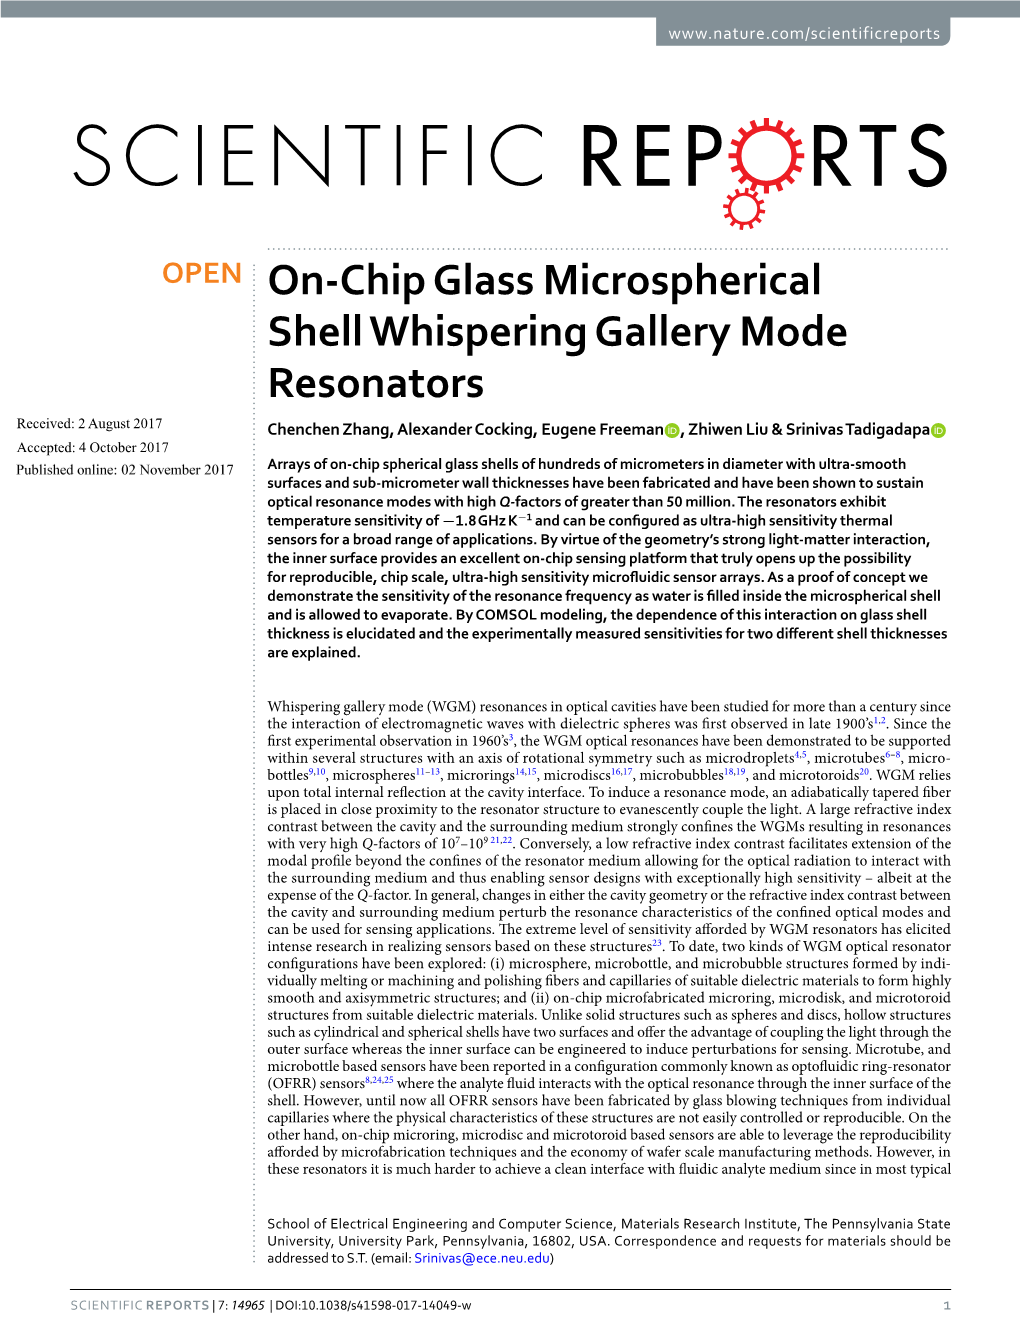 On-Chip Glass Microspherical Shell Whispering Gallery Mode Resonators